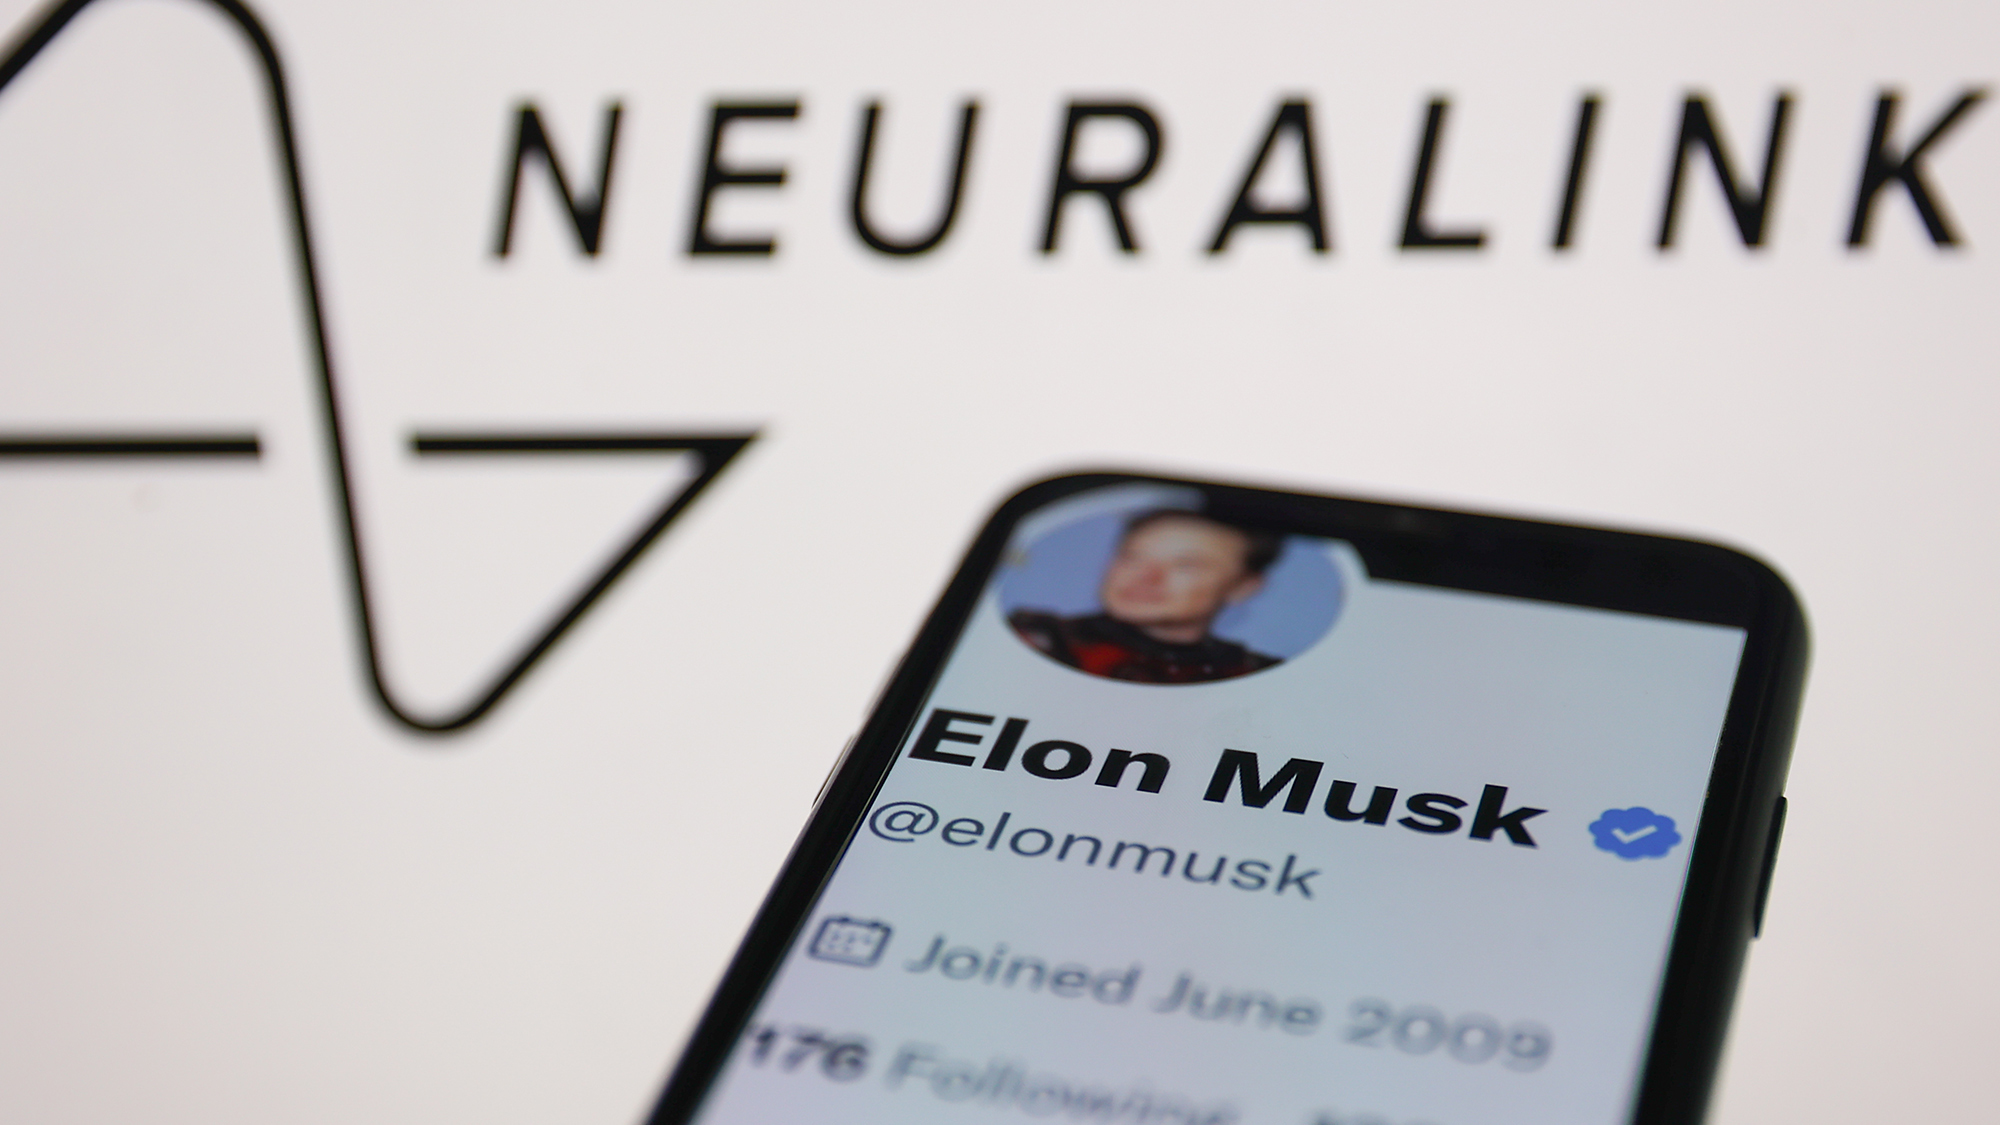 Elon Musk alleges Neuralink completed its first human trial implant